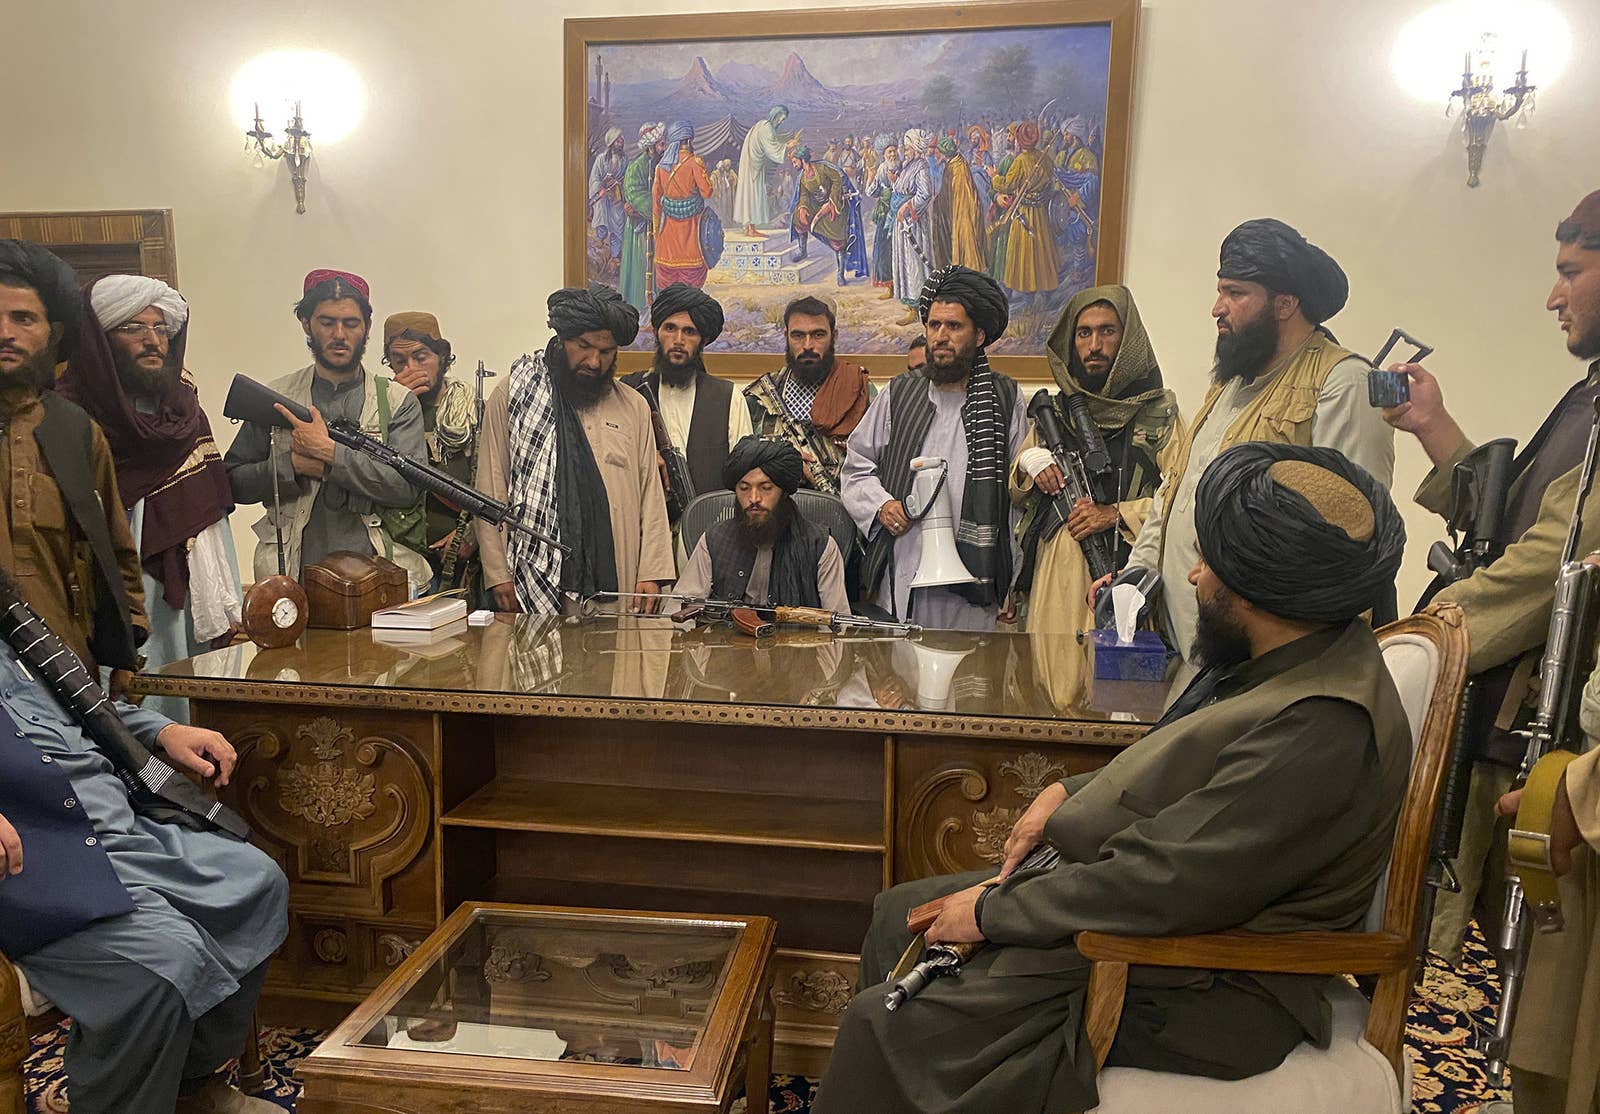 A group shot of Taliban fighters with guns at the presidential desk 